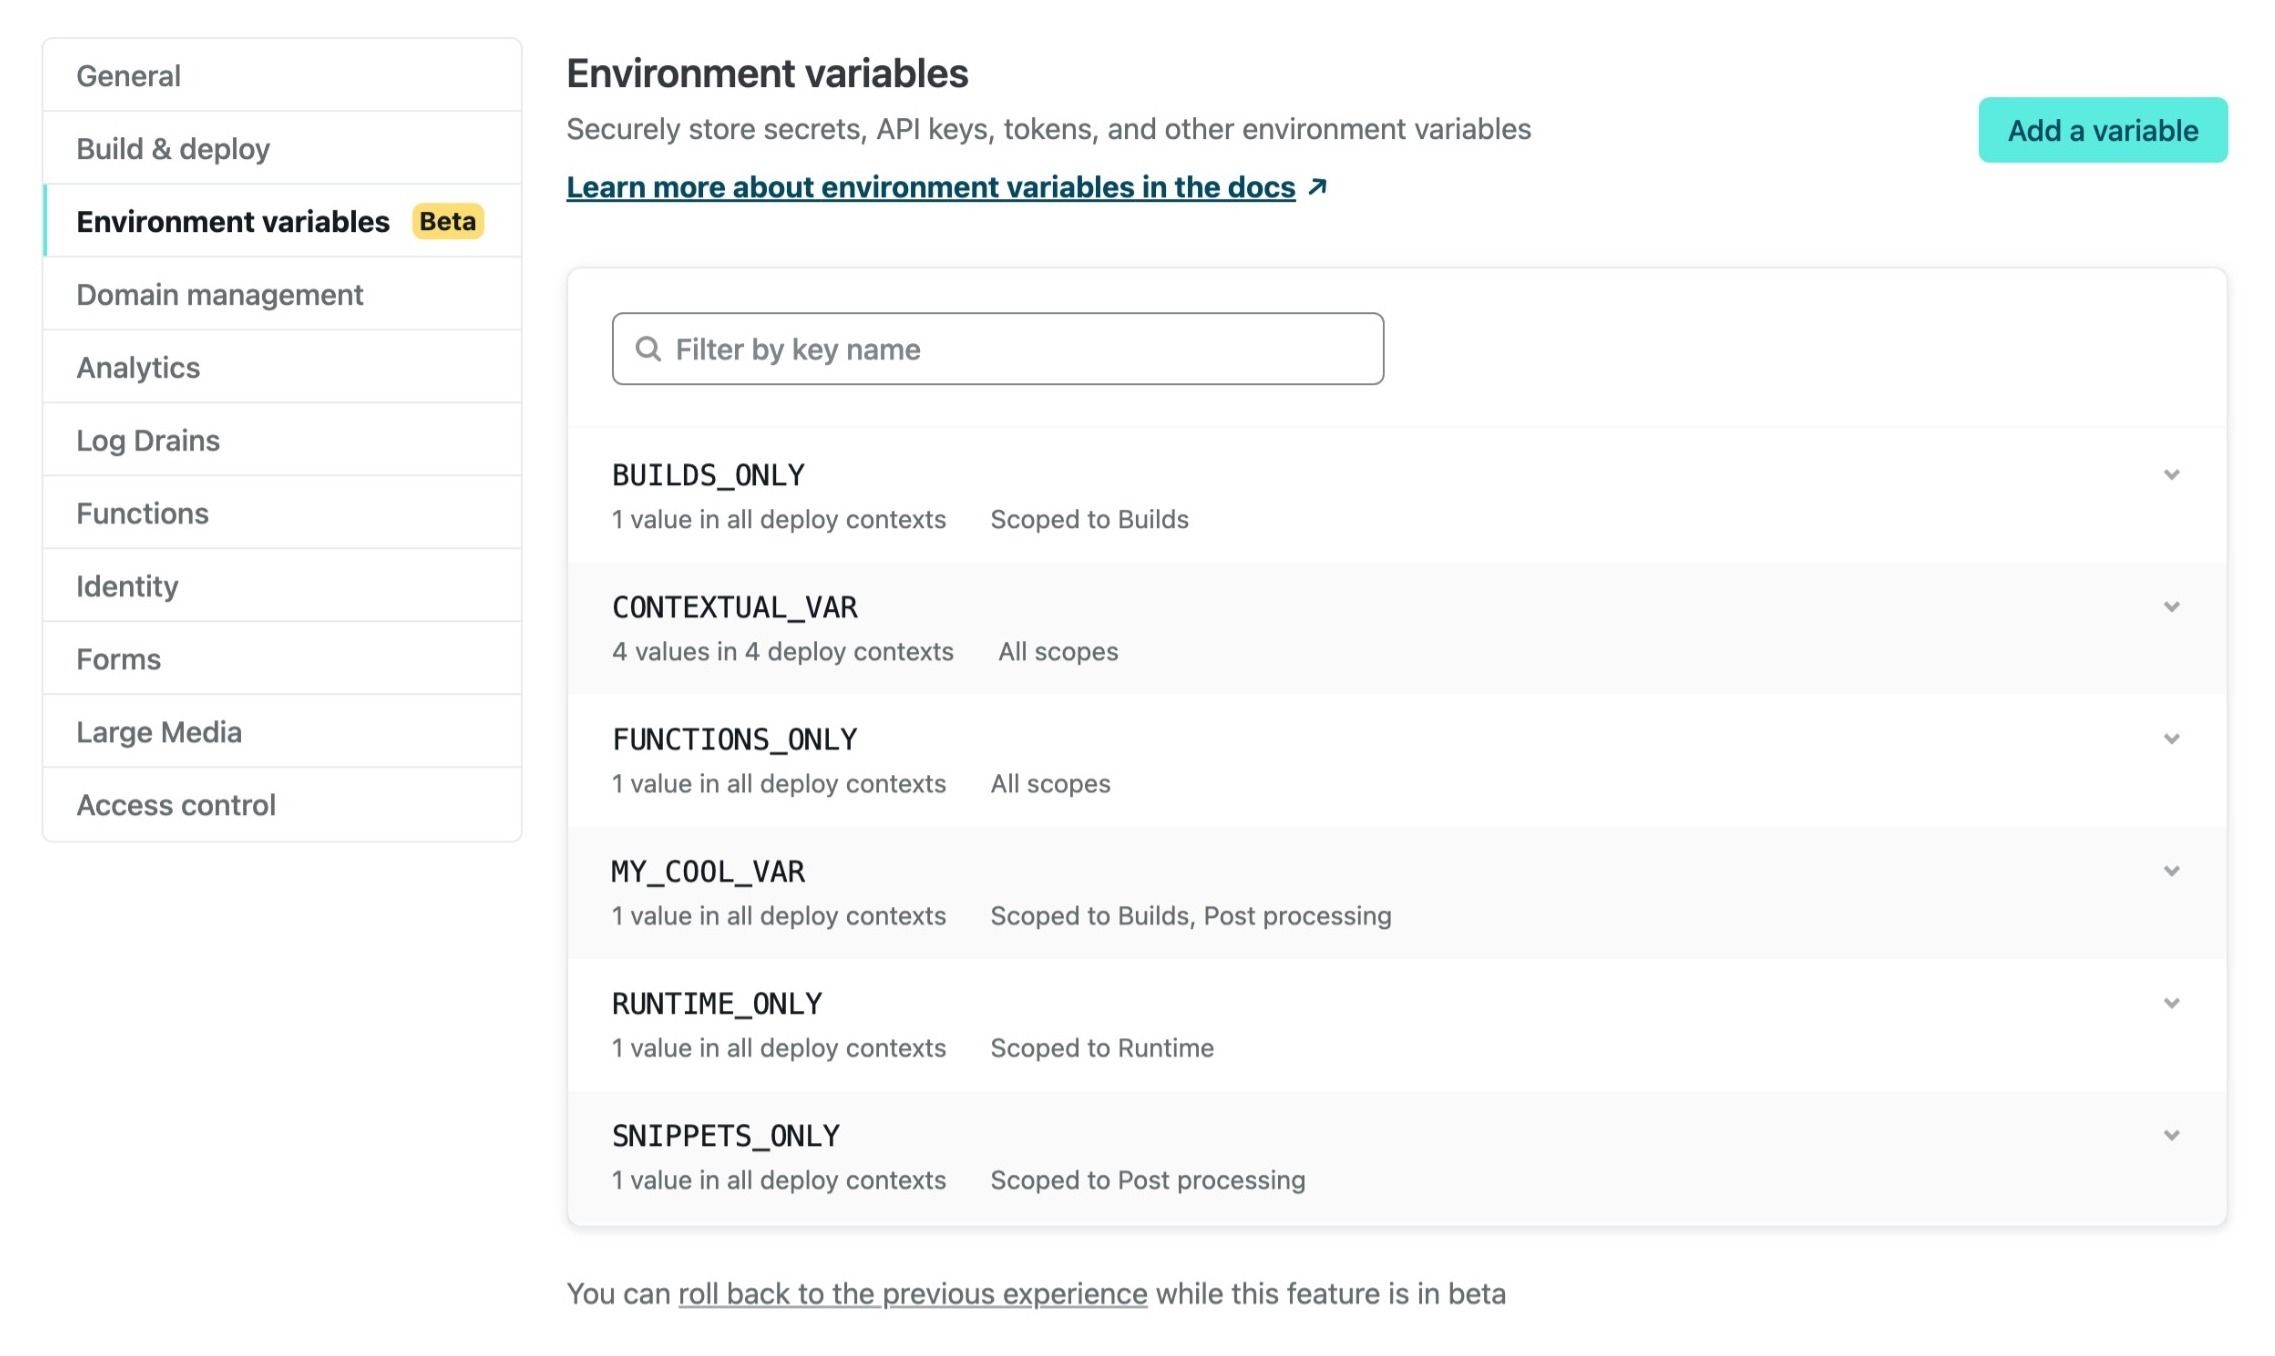 New environment variables page with variables that have different values in different contexts, and are on different scopes